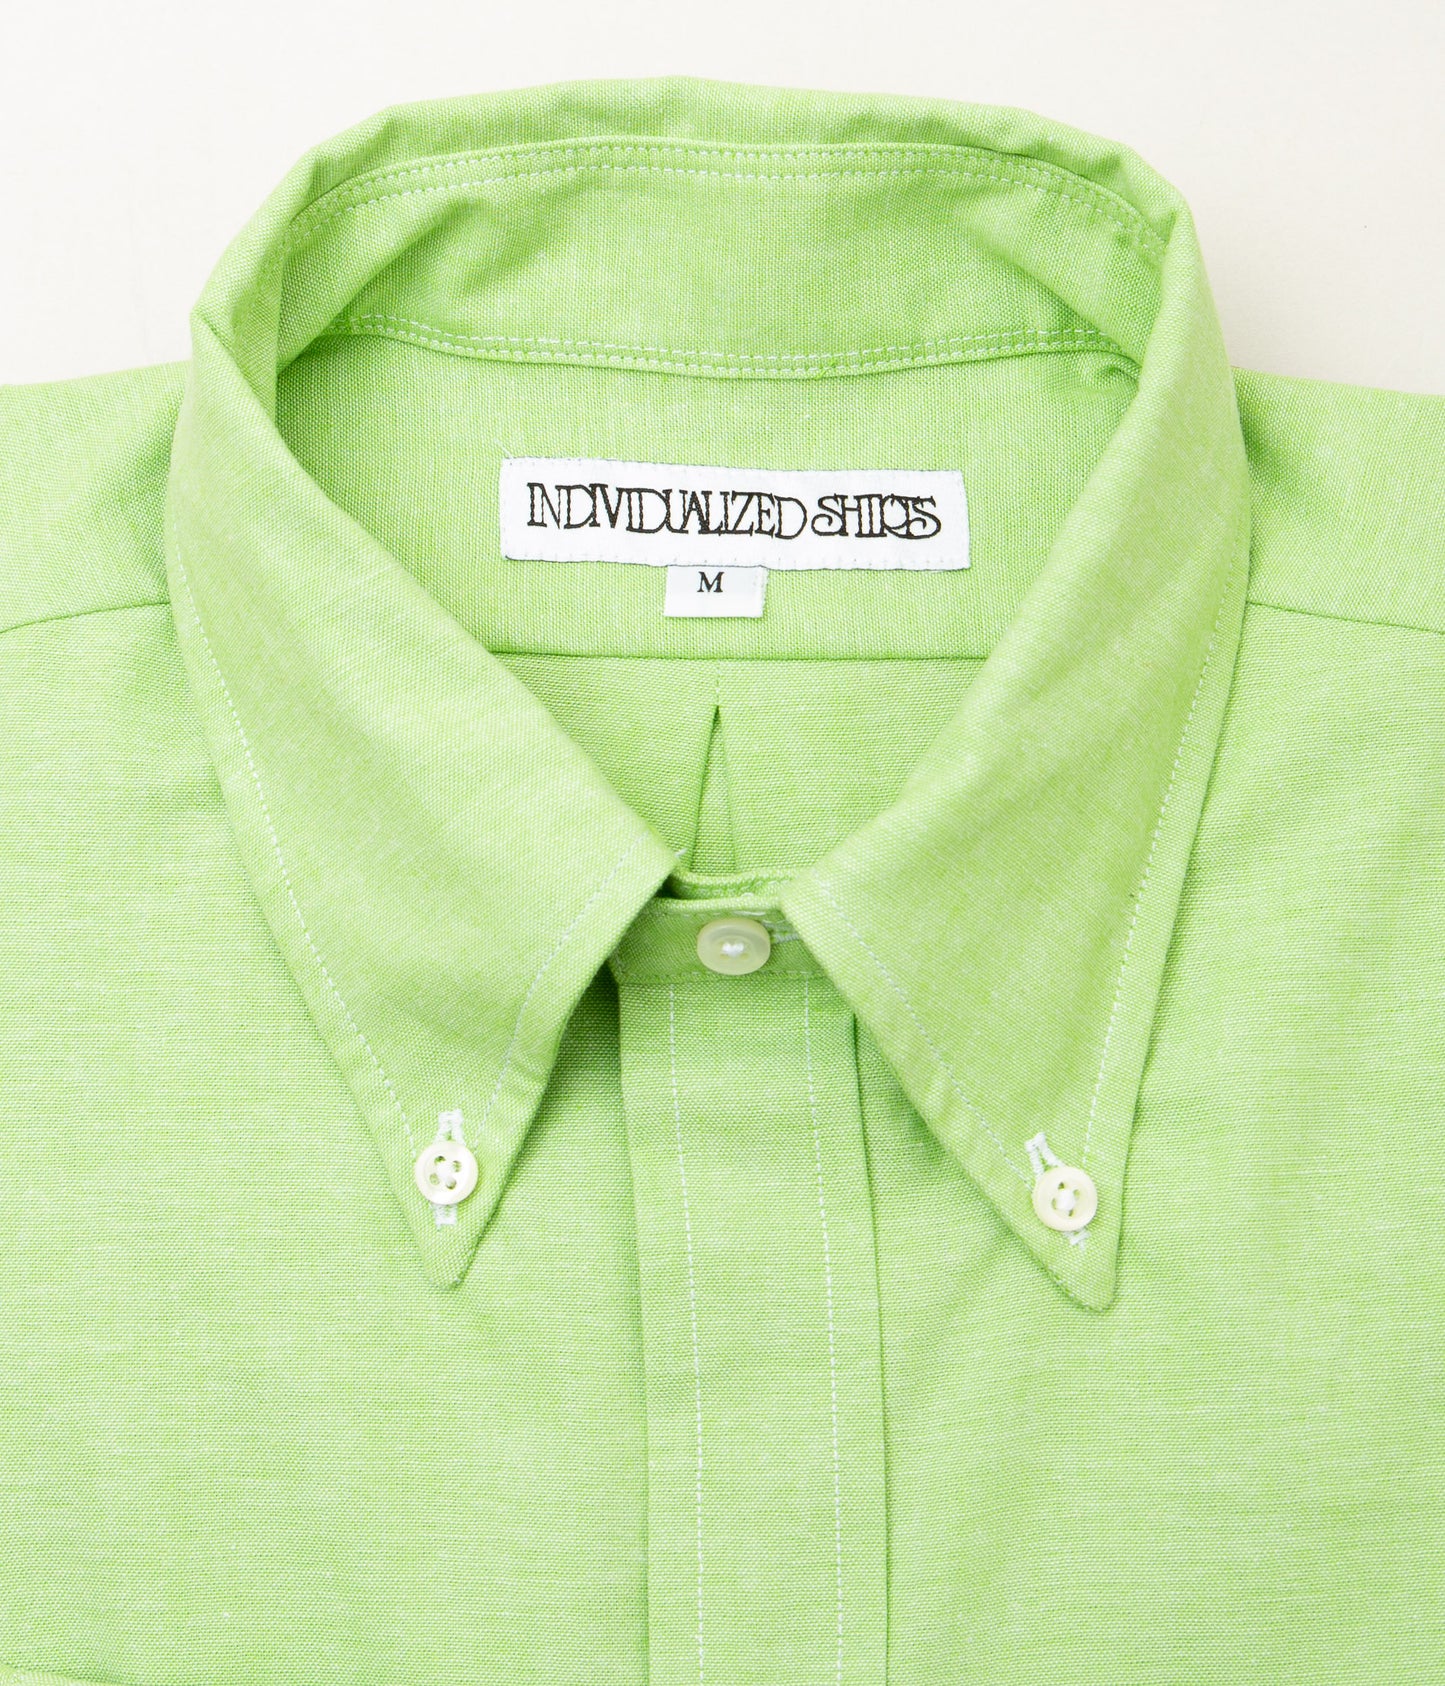 INDIVIDUALIZED SHIRTS "VINTAGE AMERICAN CLOTH 6 BUTTON FRONT SHIRT"(LIME GREEN)